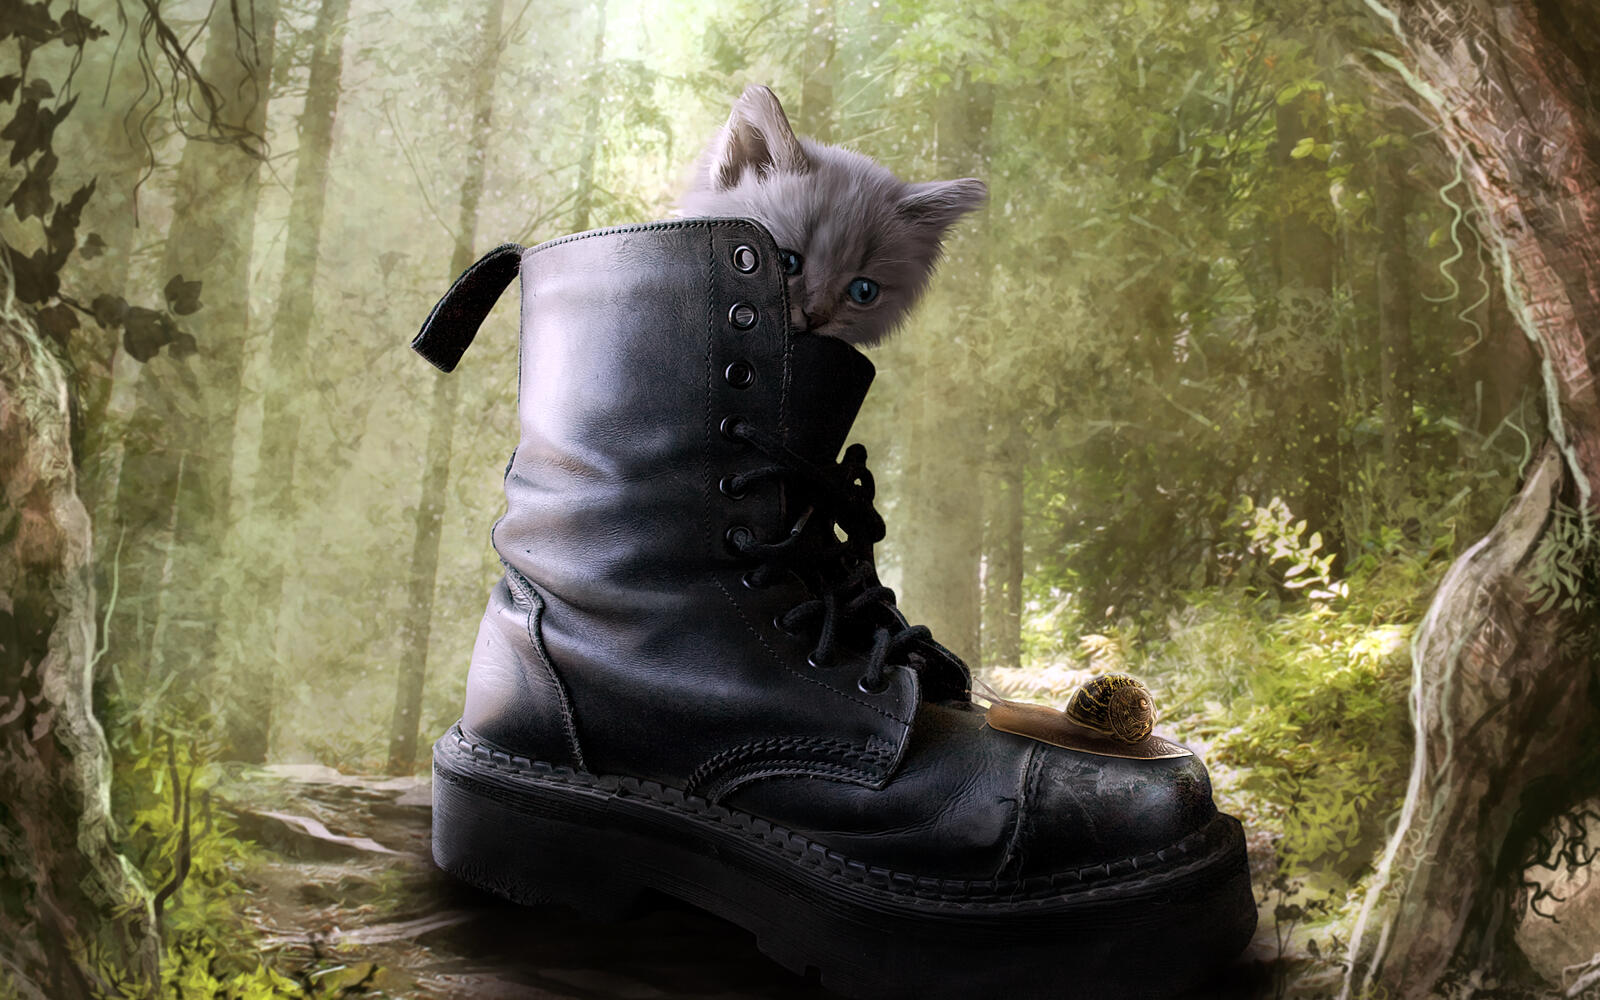 Wallpapers movies animated movies a cat in boots on the desktop